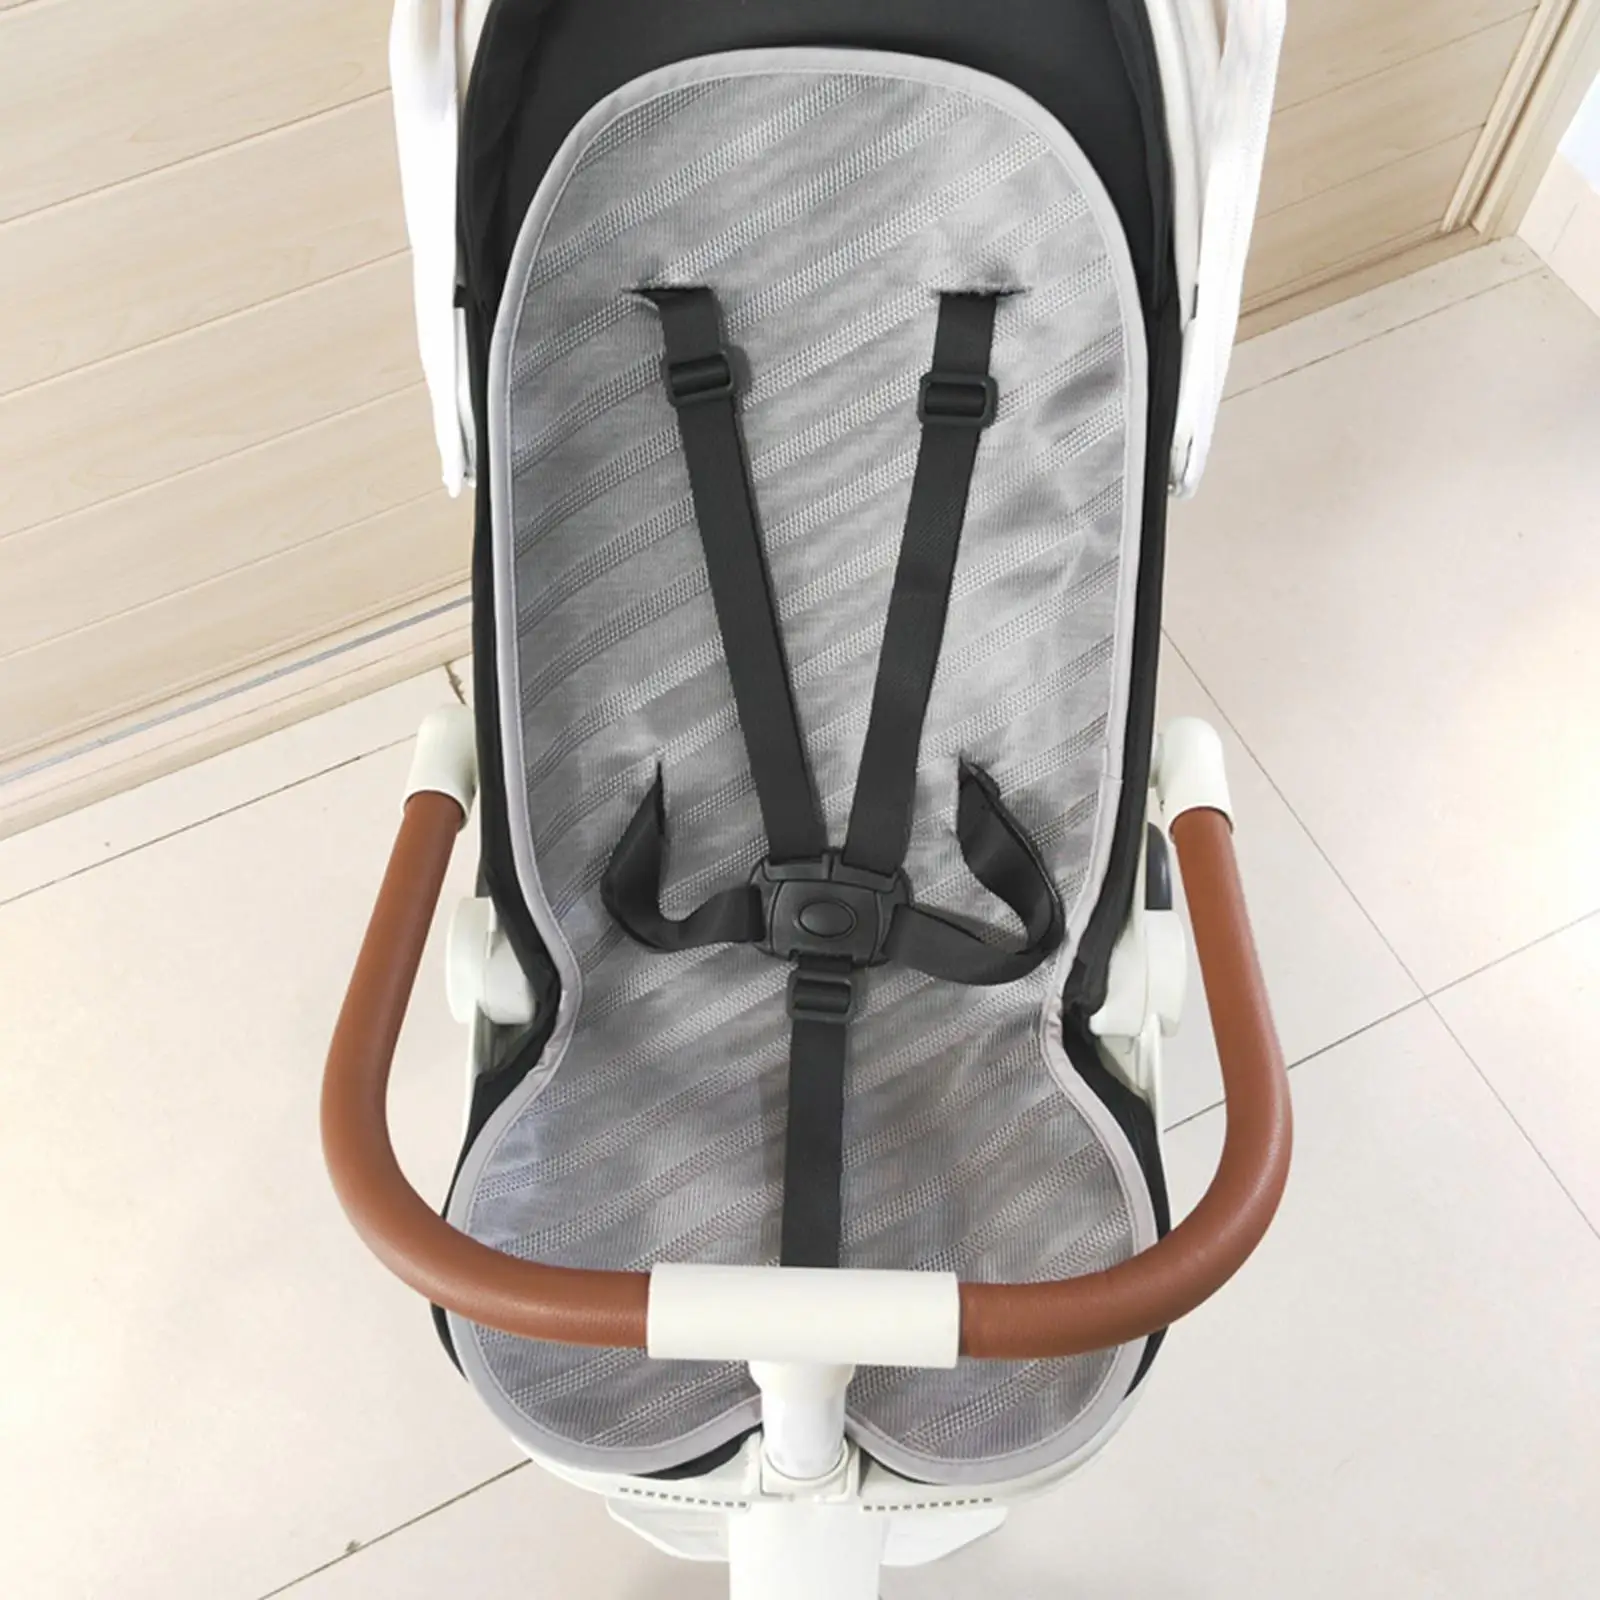 Summer Cooling Seat Pad Comfortable Strollers Cooling Pad for Pushchair Strollers Baby Dining Chair Trolley Child Safety Seat